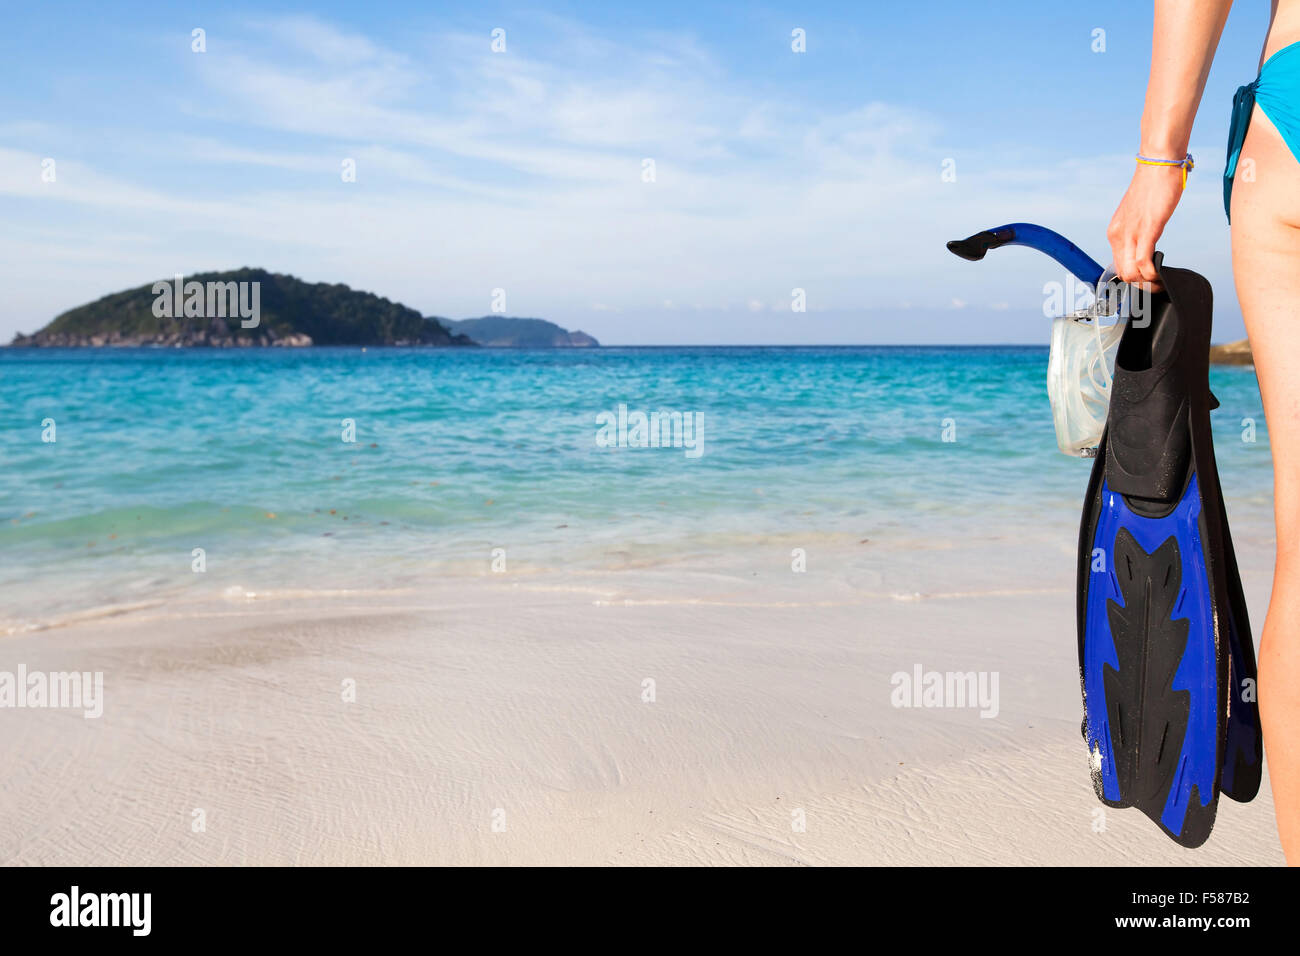 snorkeling on paradise island, background with hand holding fins and mask with snorkel Stock Photo